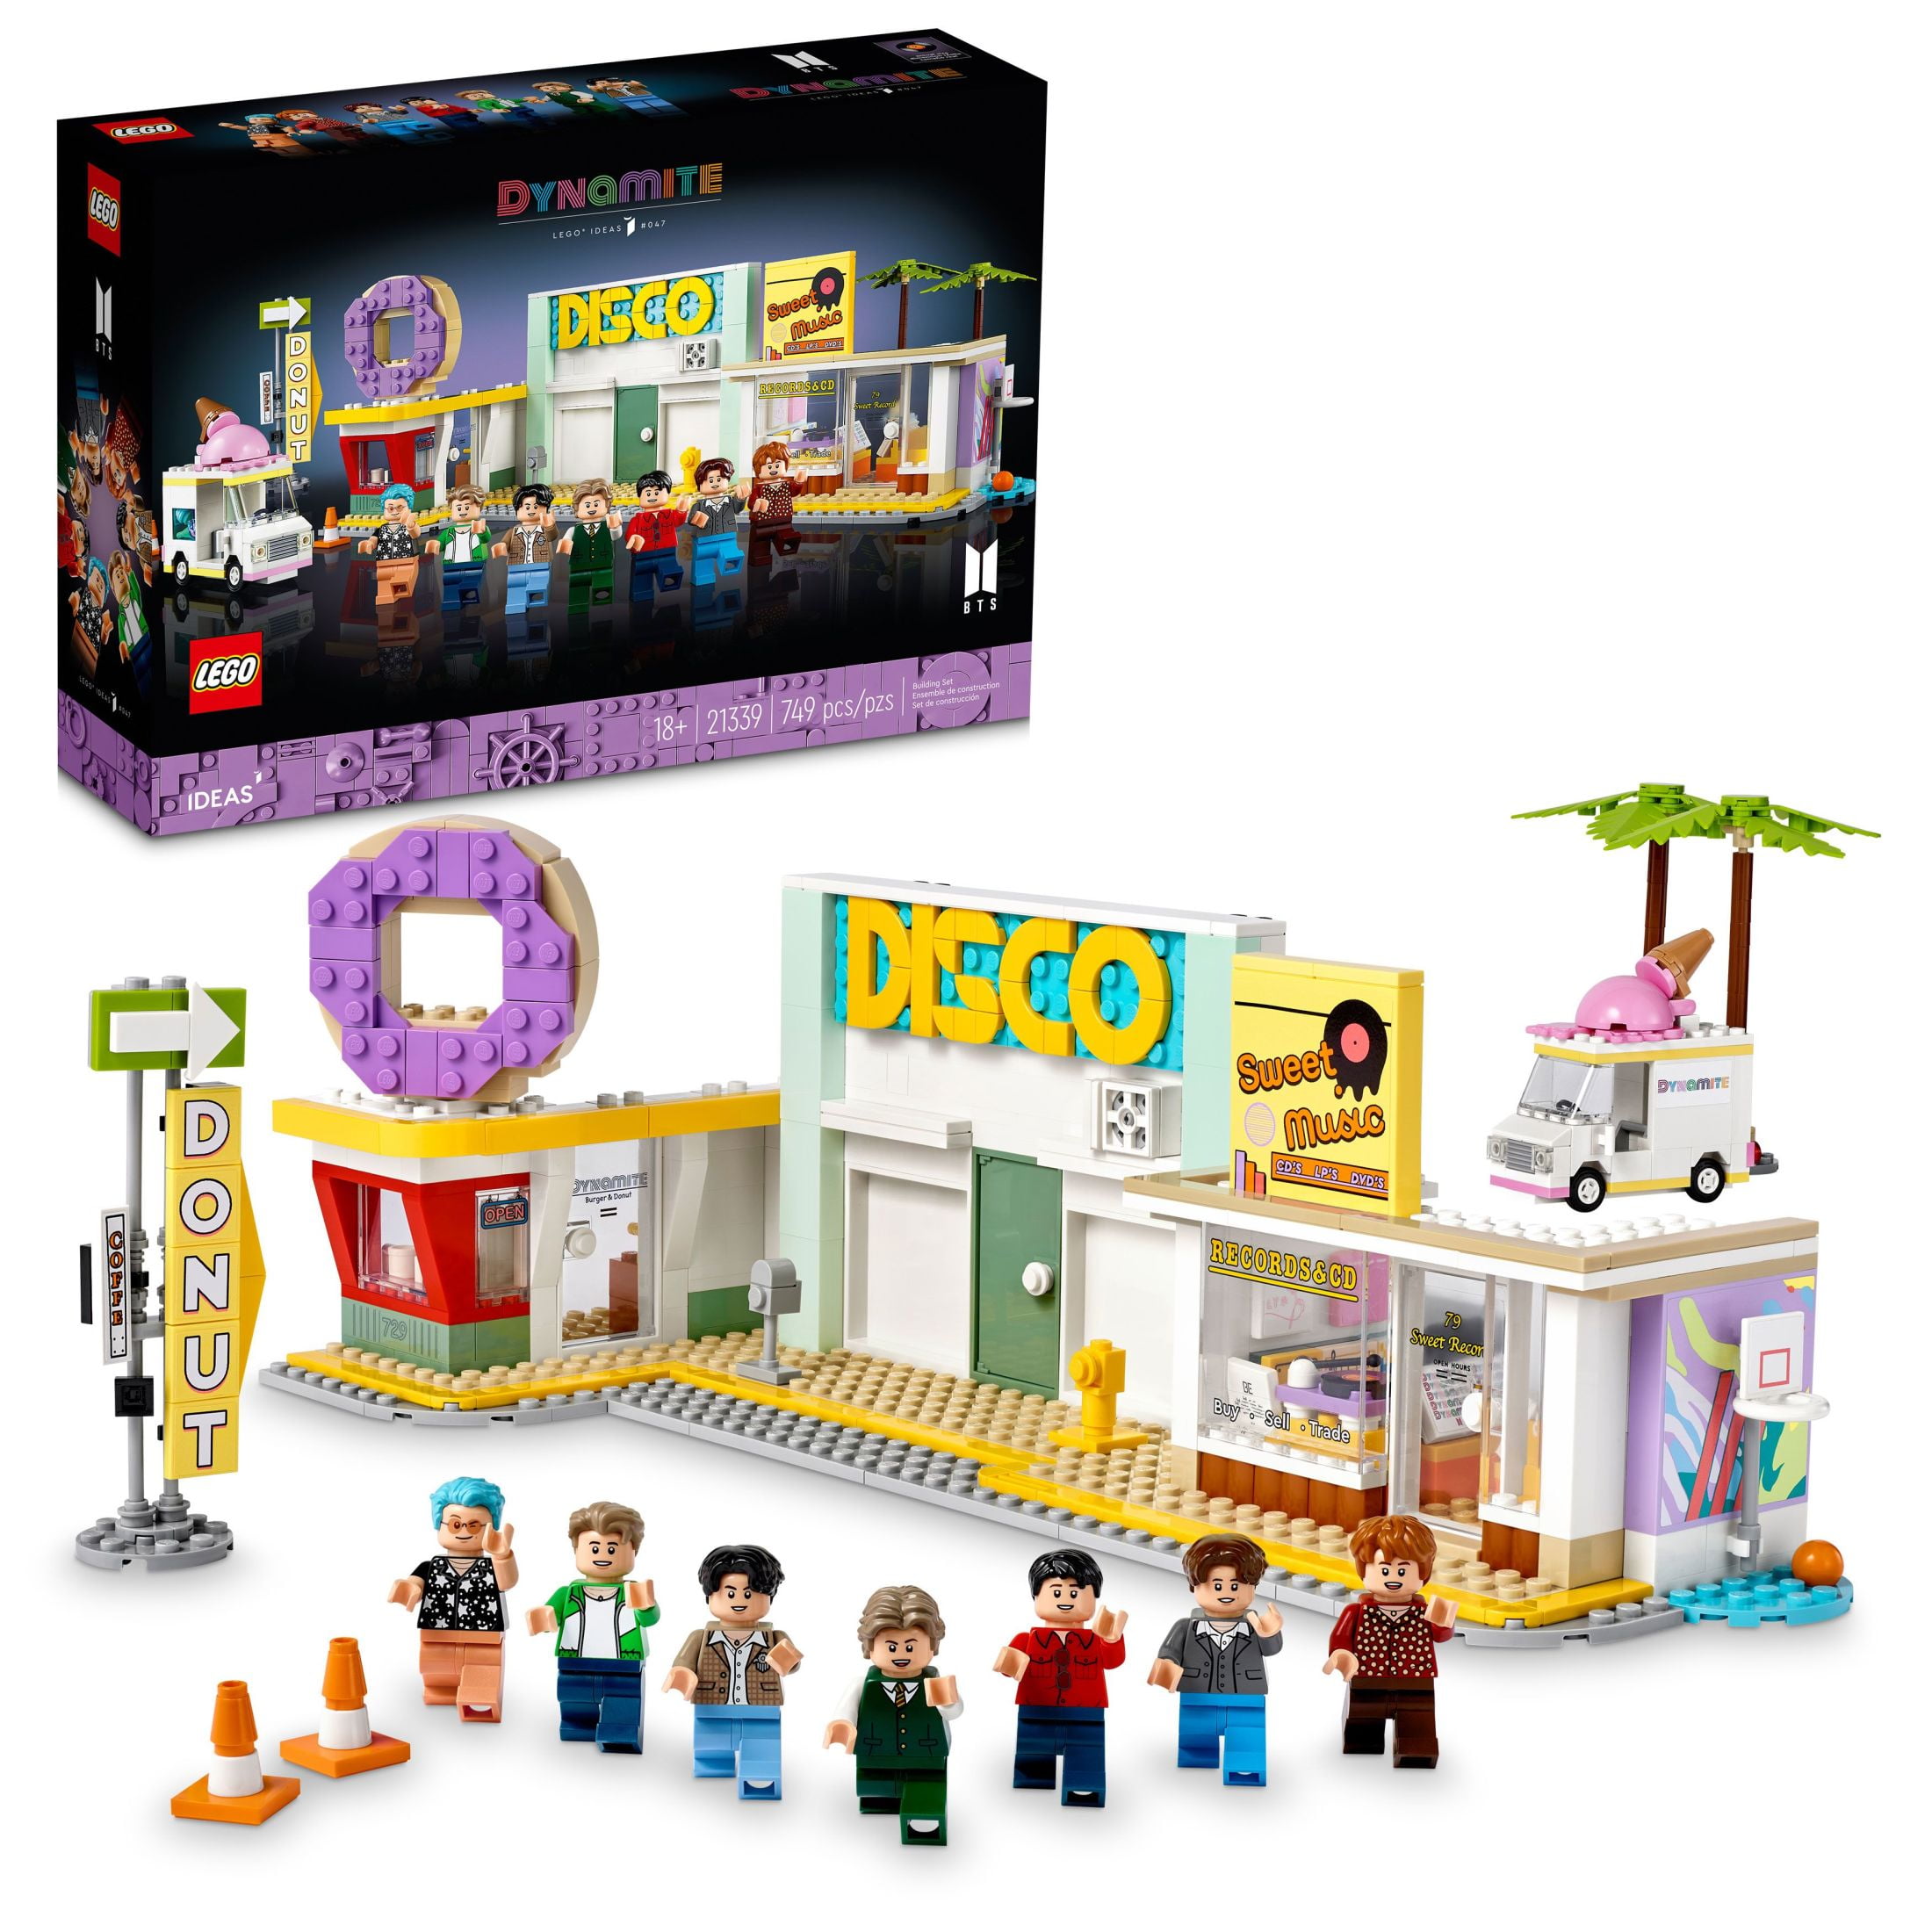 LEGO Ideas BTS Dynamite 21339 Model Kit for Adults, Gift Idea for BTS Fun with 7 Minifigures of the Famous K-pop Band, Features RM, Jin, SUGA, j-hope, Jimin, V and Jung K - $56.54